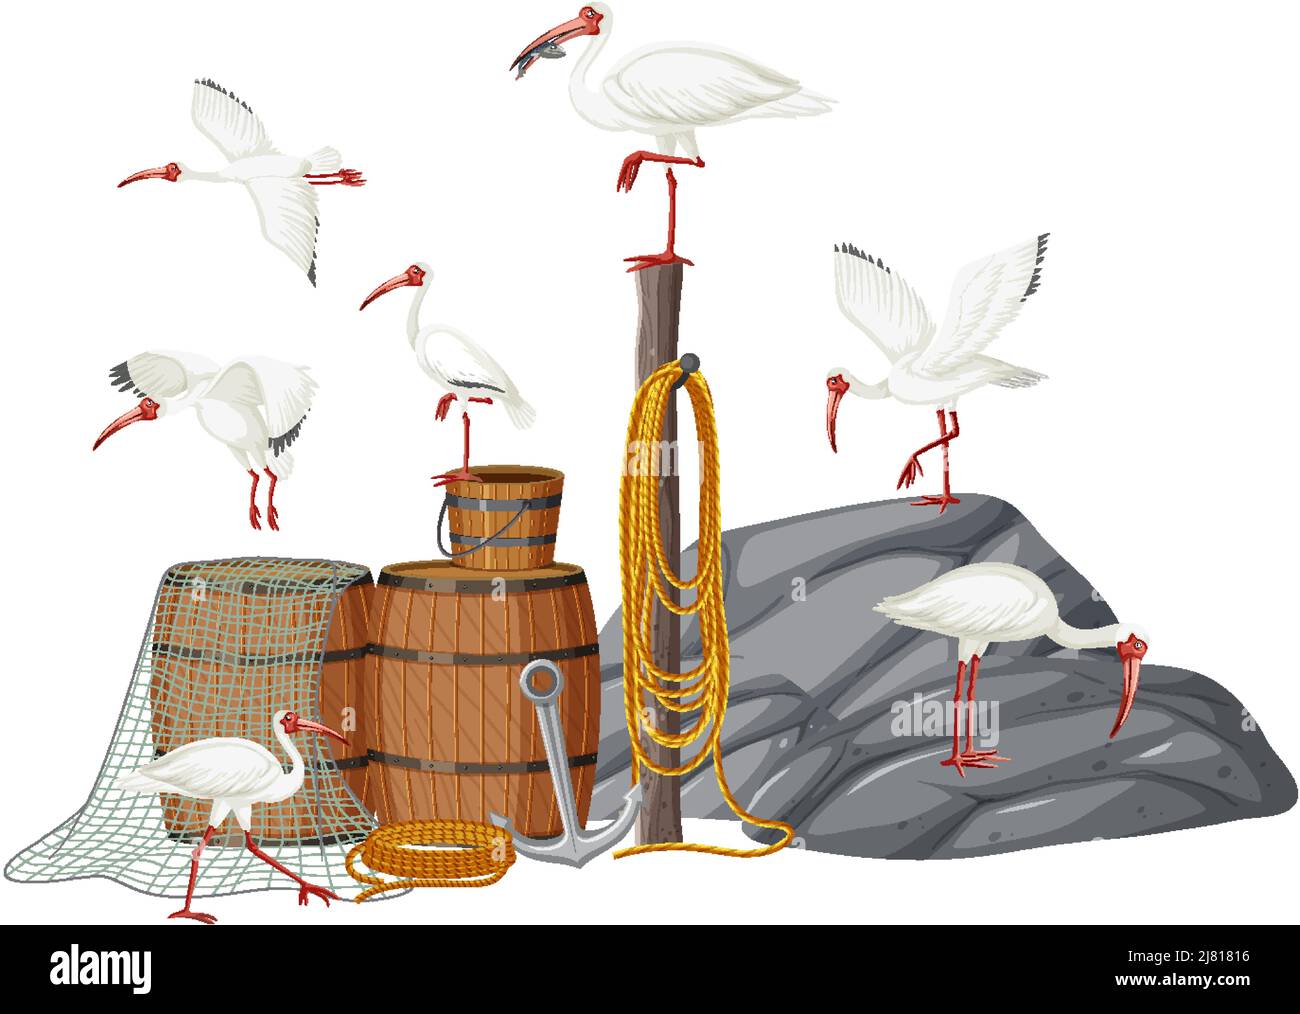 American white ibis group with fishing objects illustration Stock Vector